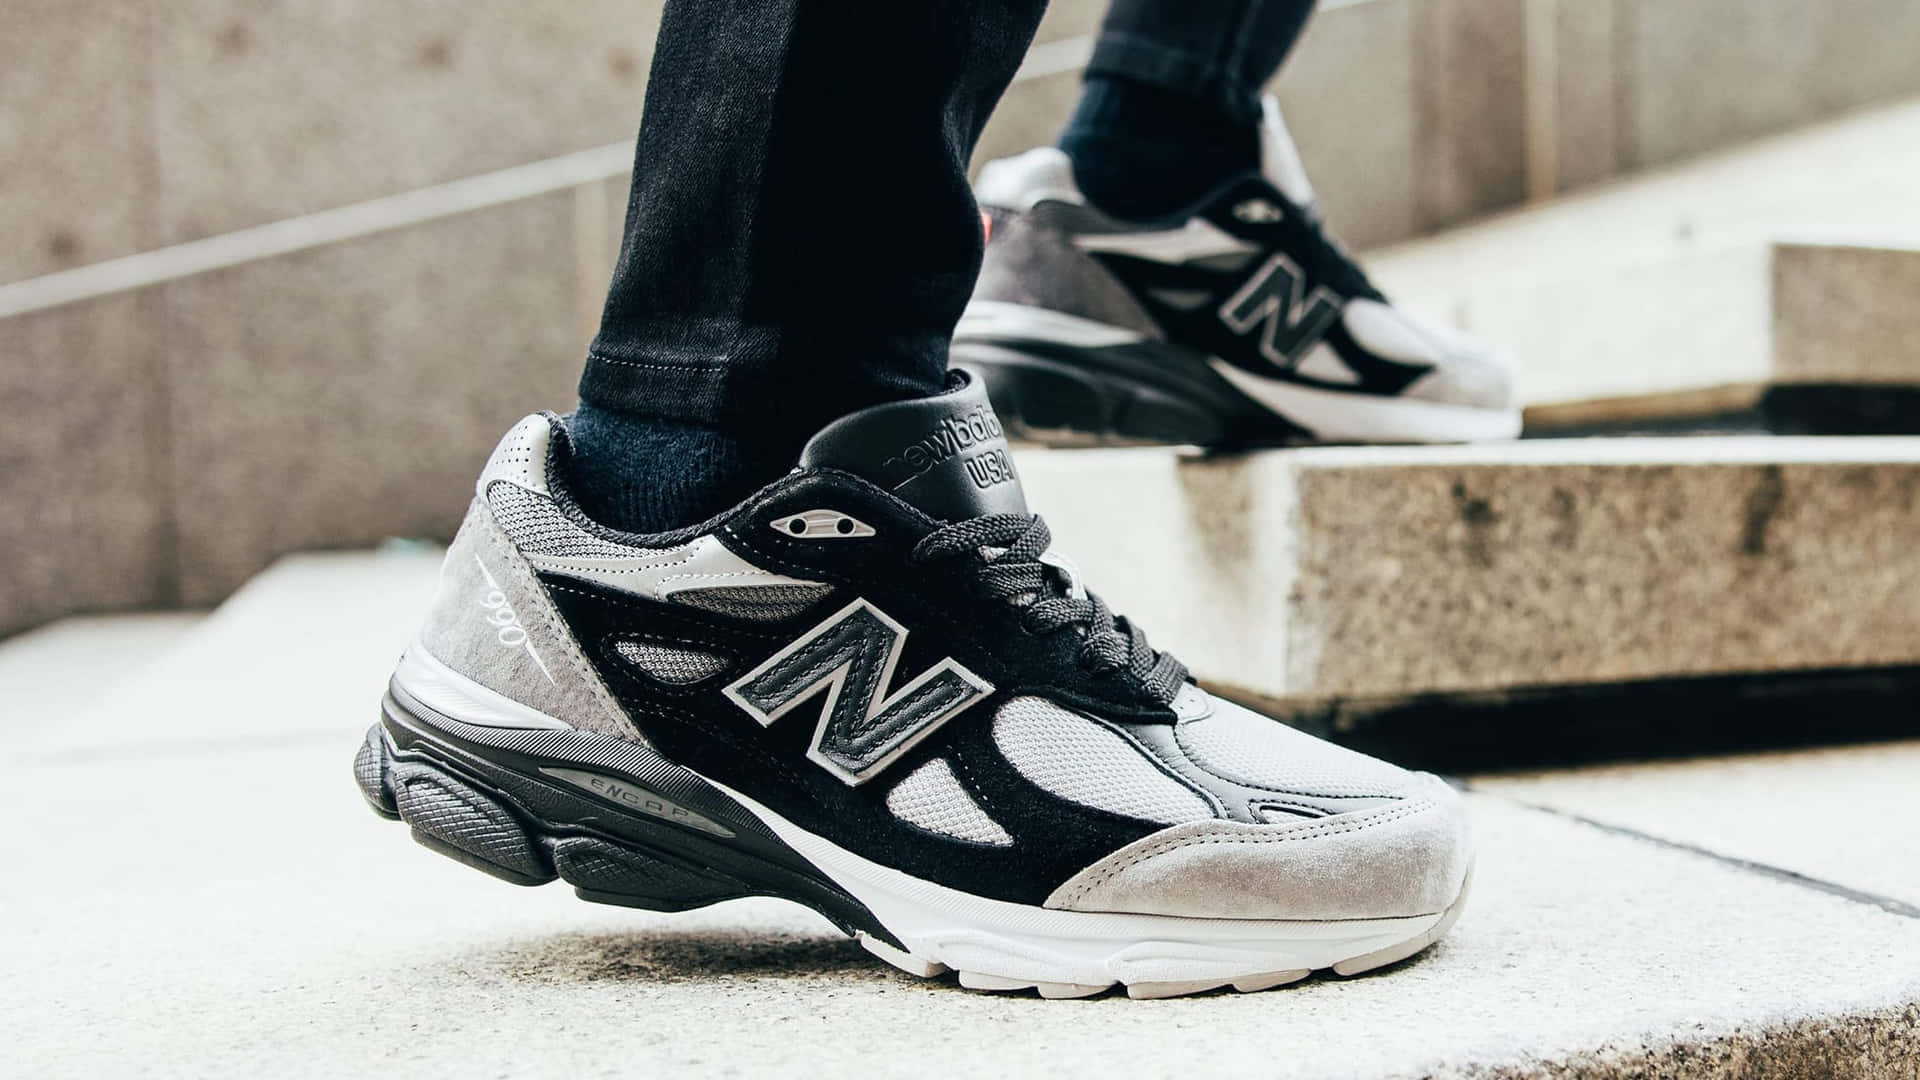 Step Up Your Style with New Balance